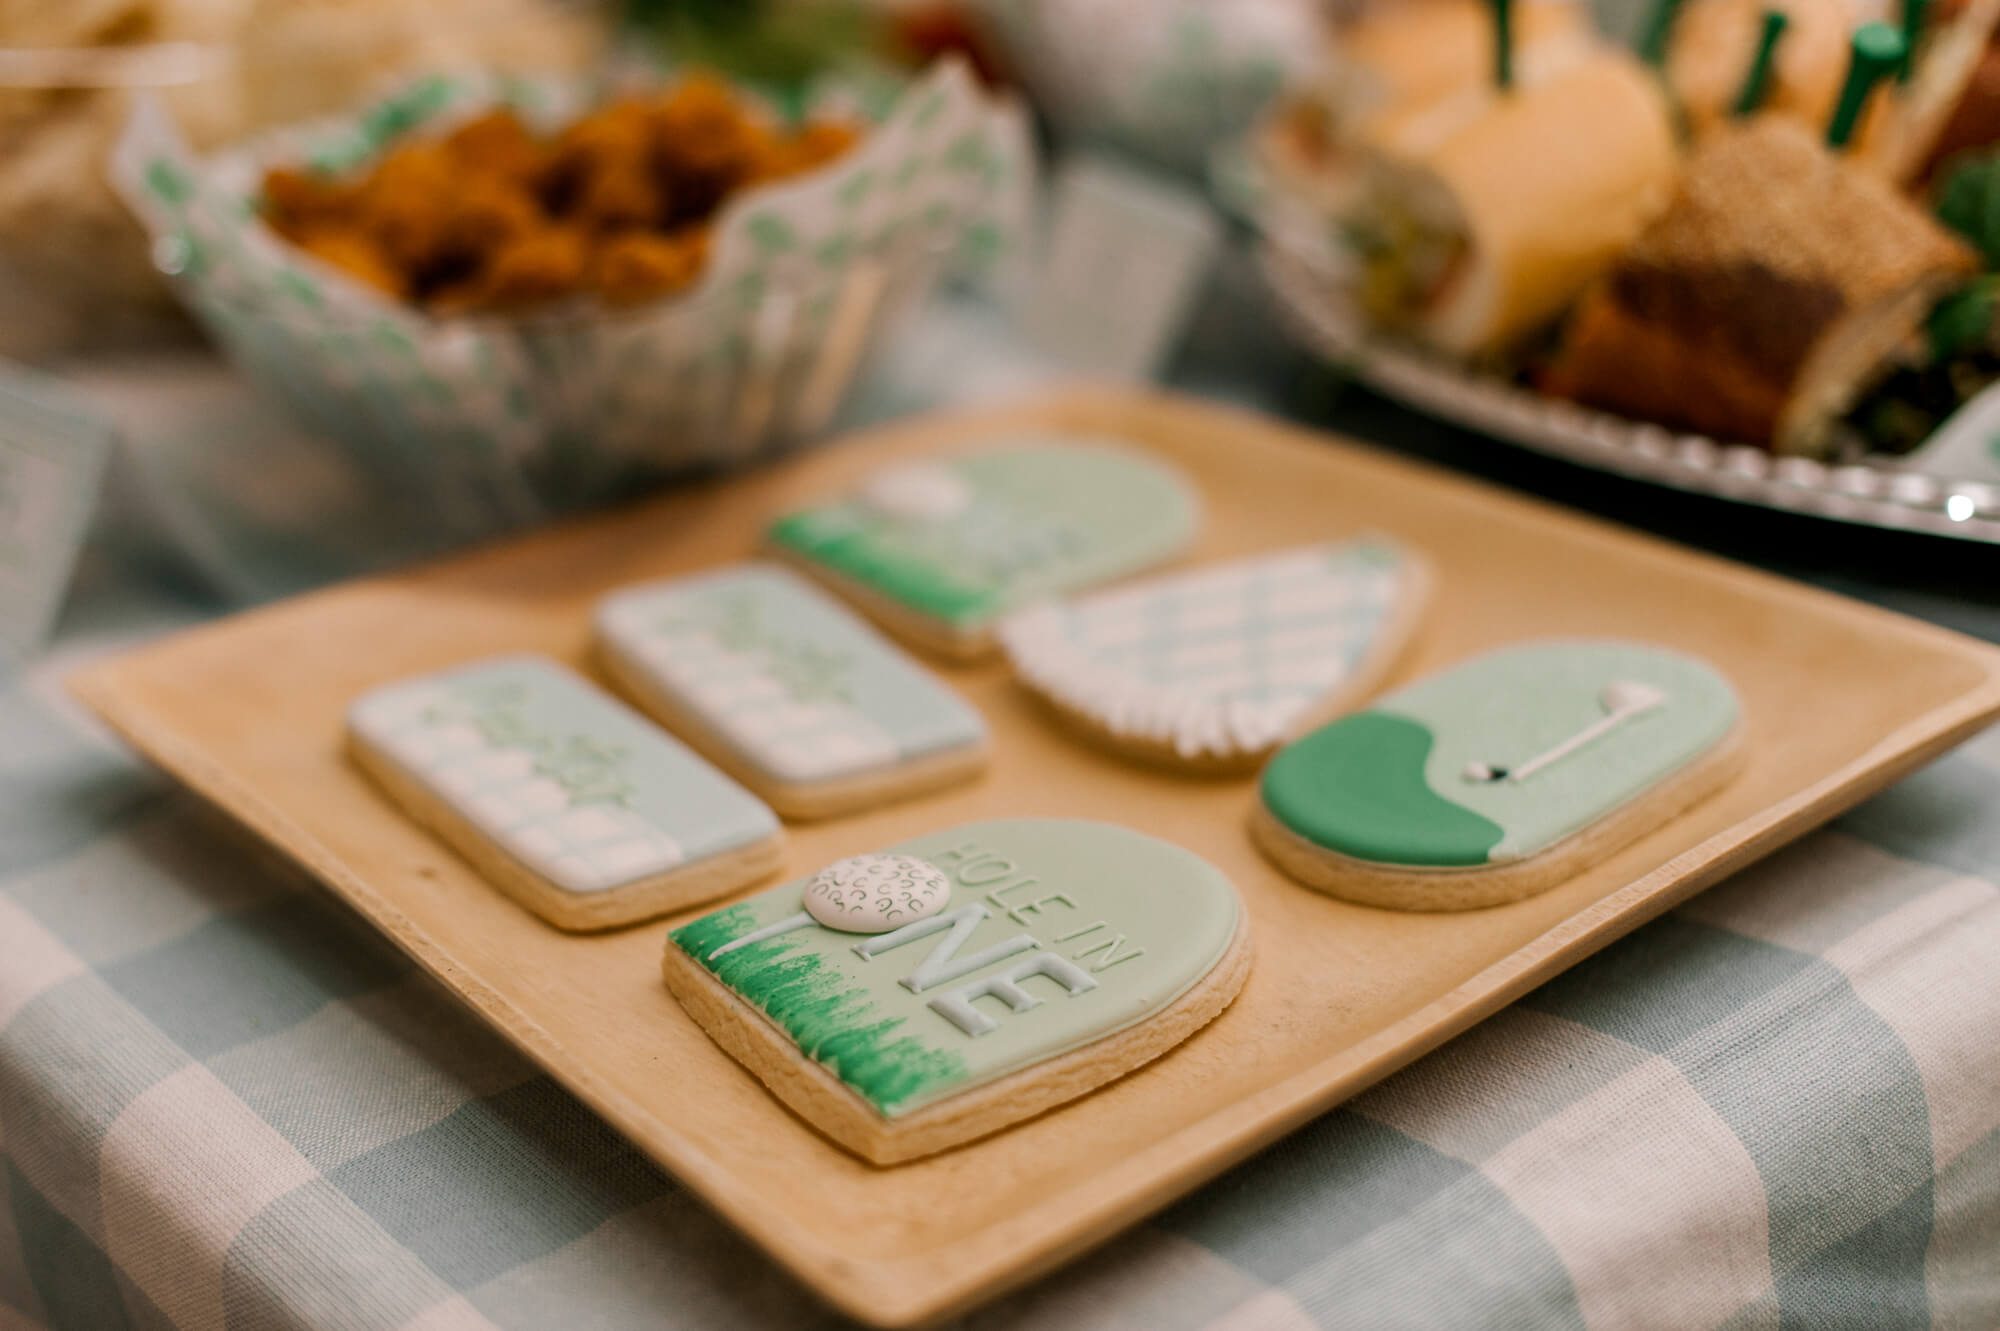 Hole in One themed first birthday party cookies from a recent session as an Orlando baby photographer.